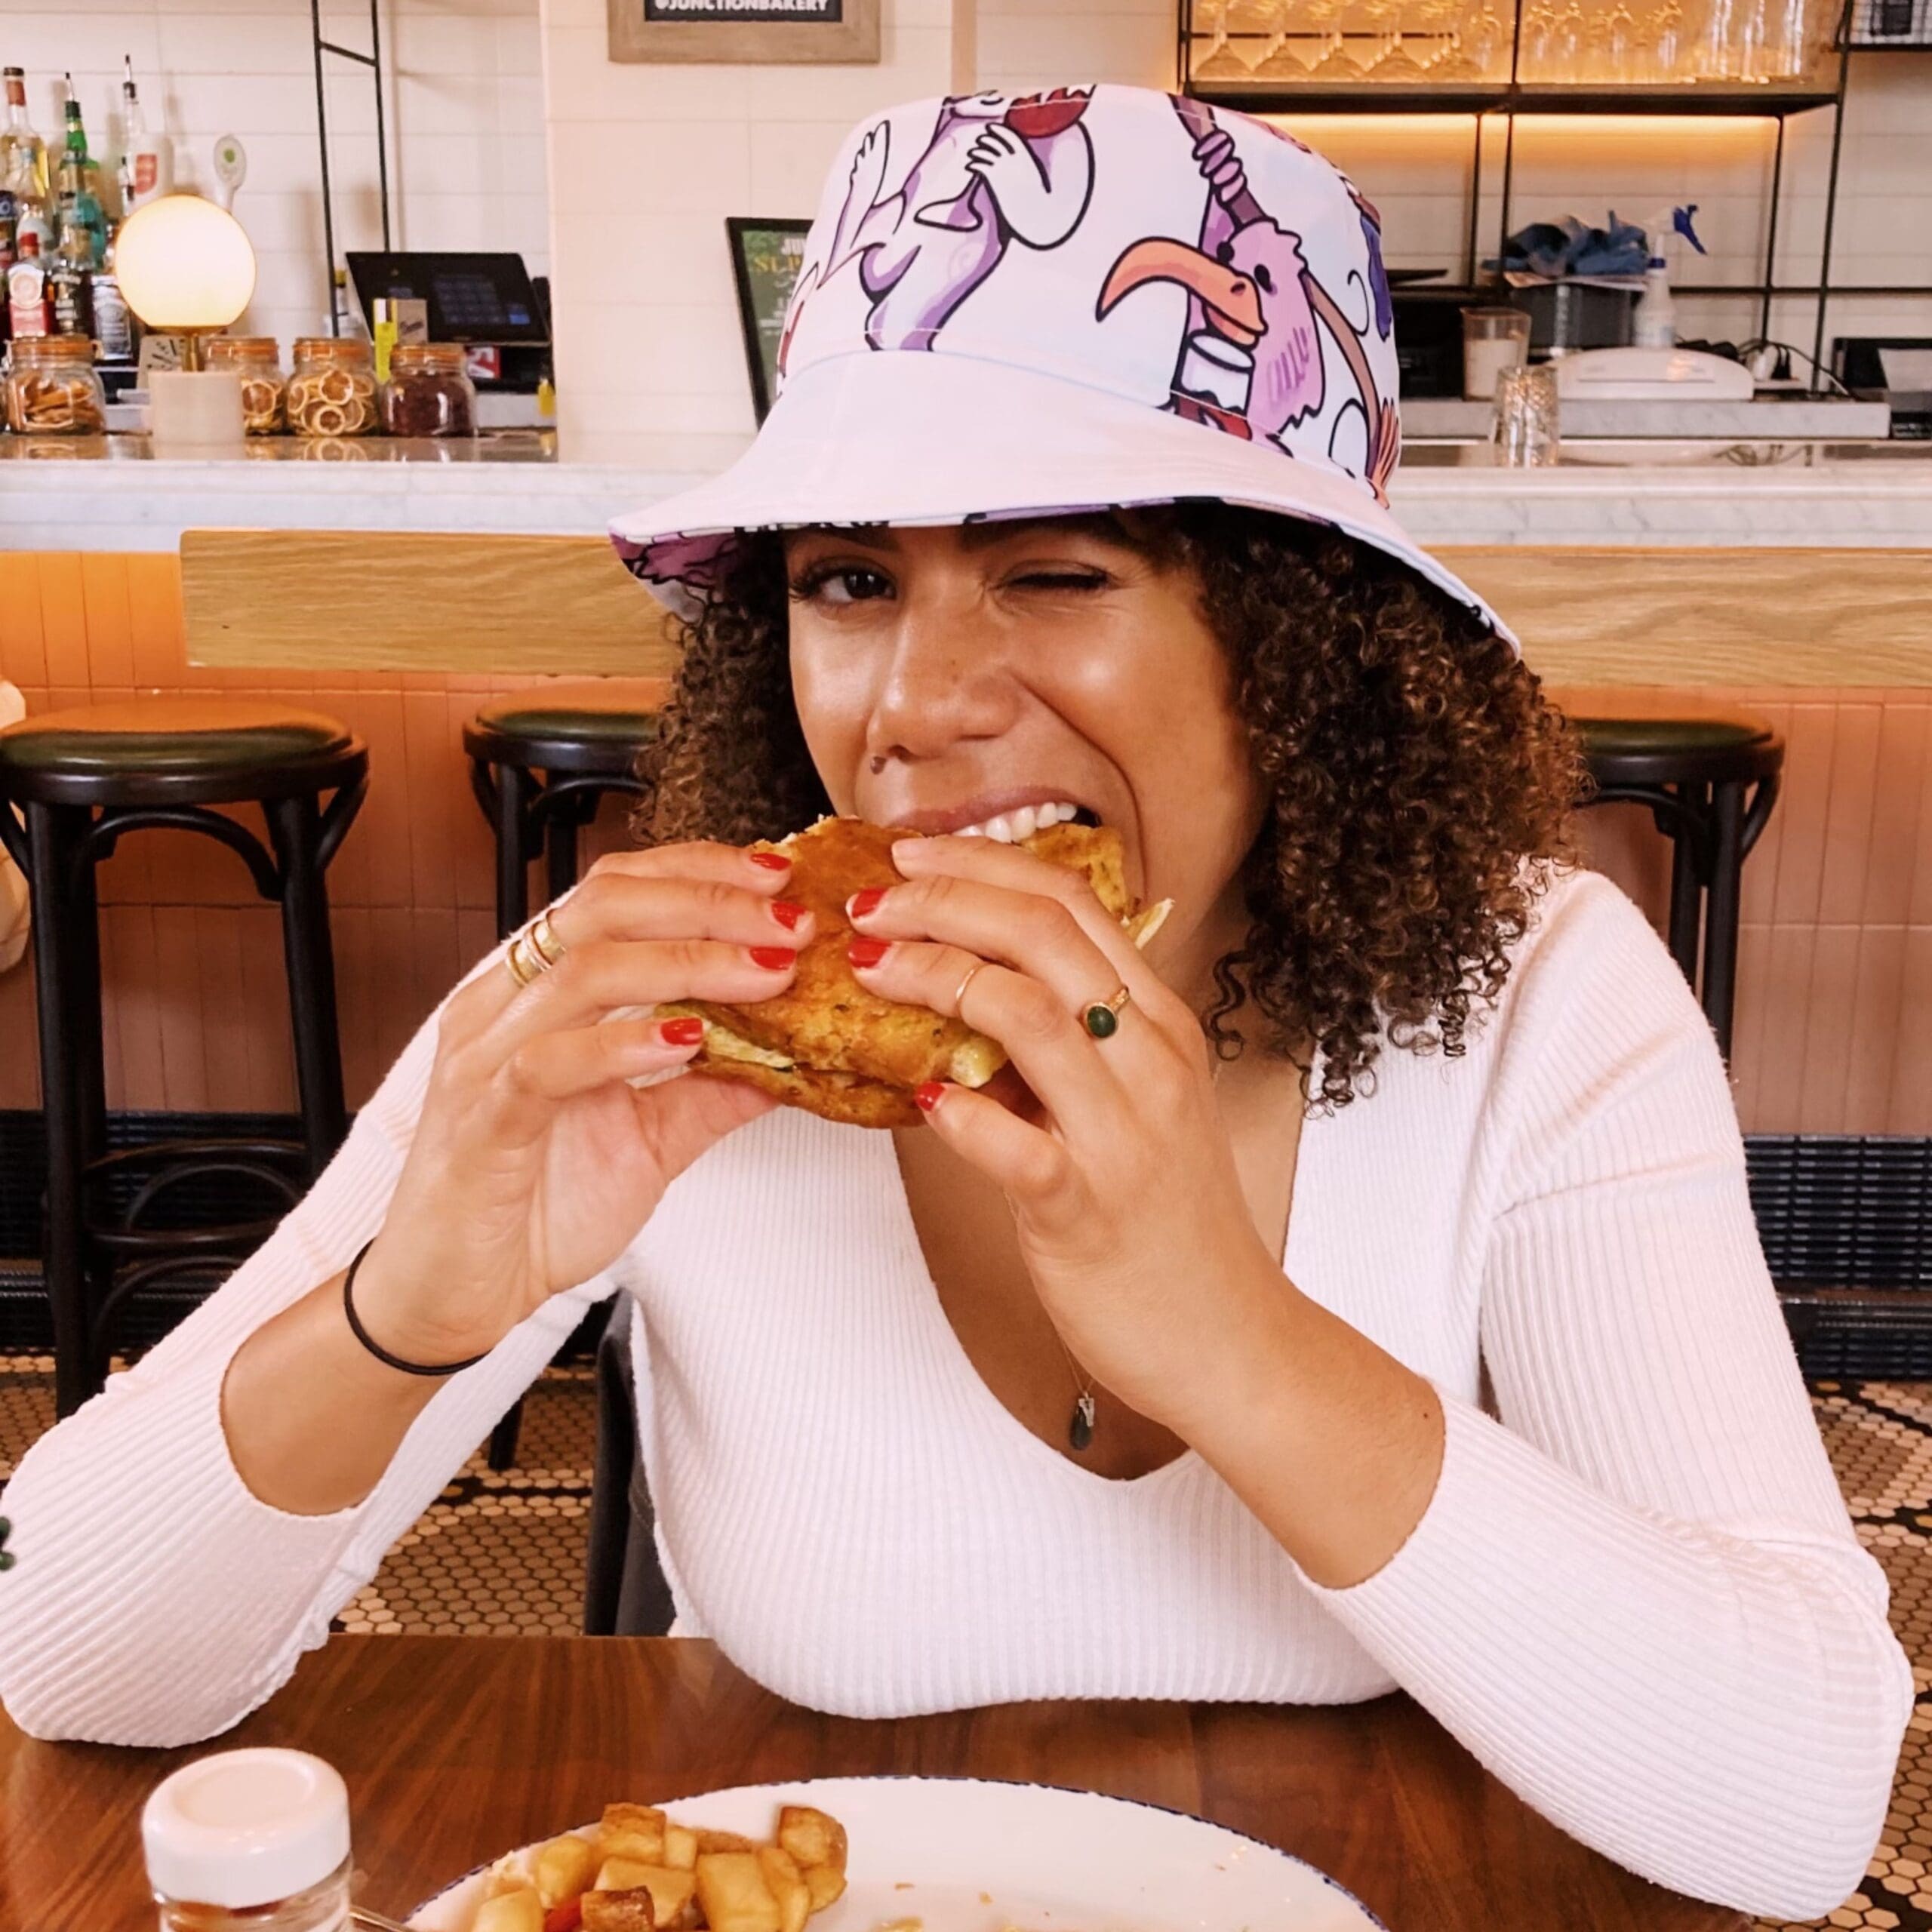 A woman wearing a bucket hat sitting at a table eating a sandwich